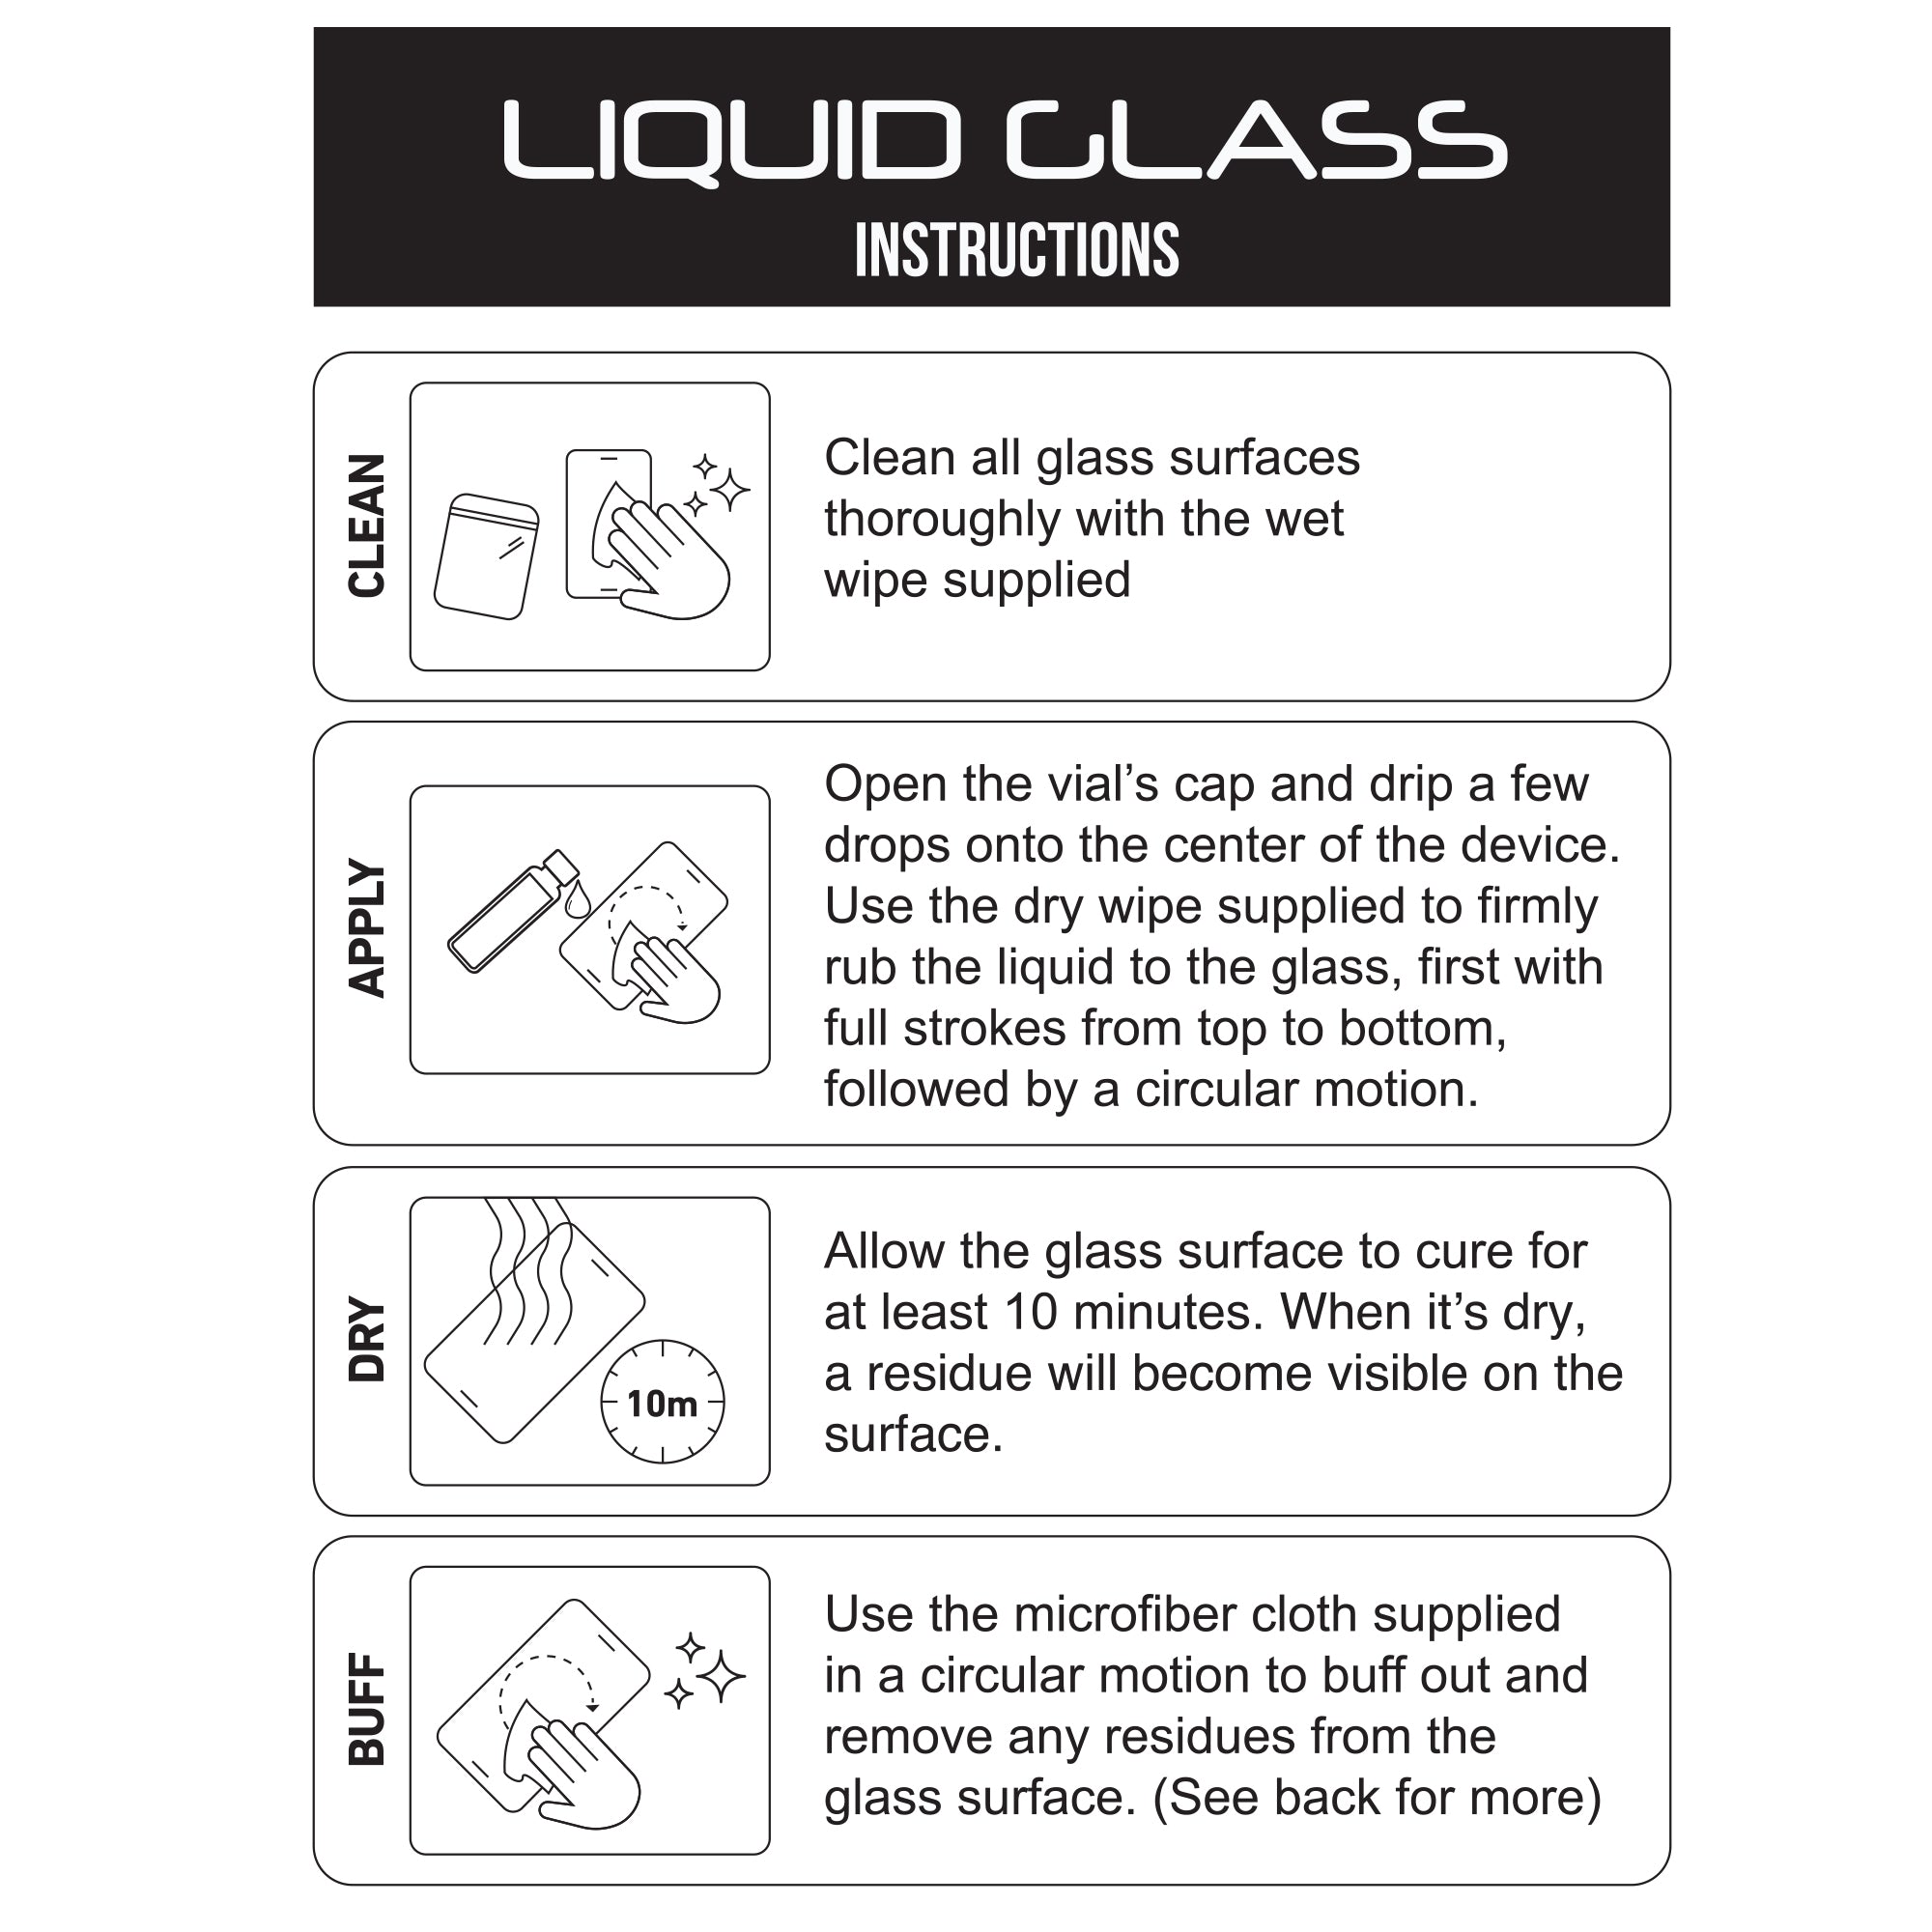 Liquid Glass Screen Protector Universal for All Phones Tablets Watches - 1 Pack